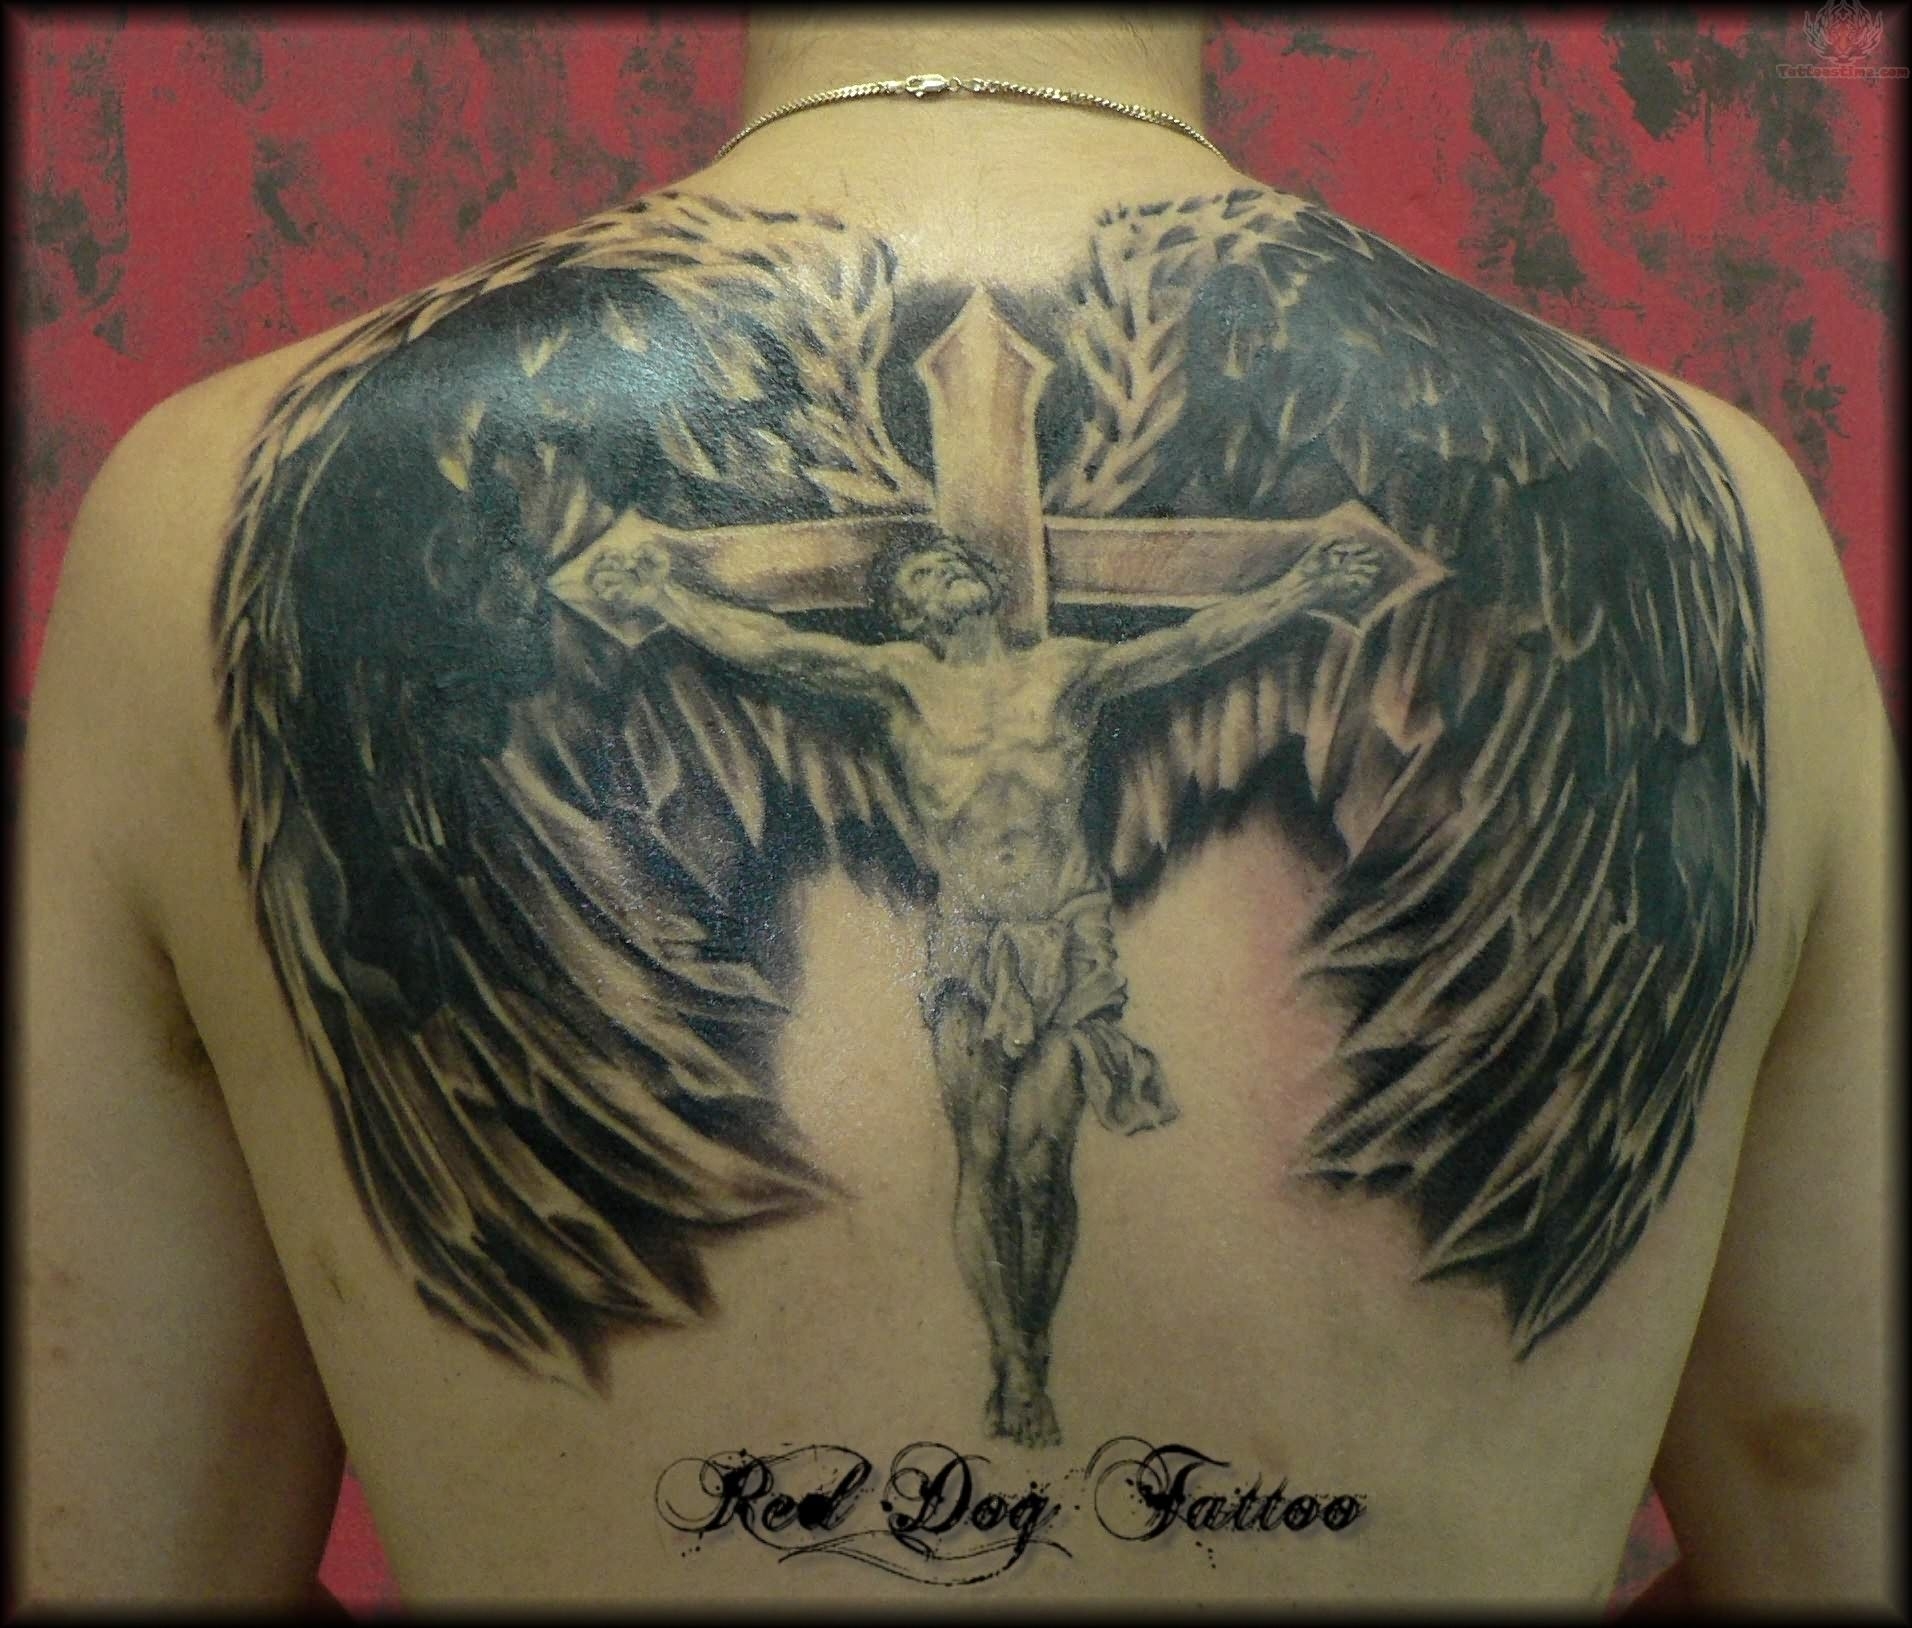 crucified christ against wings tattoo for men